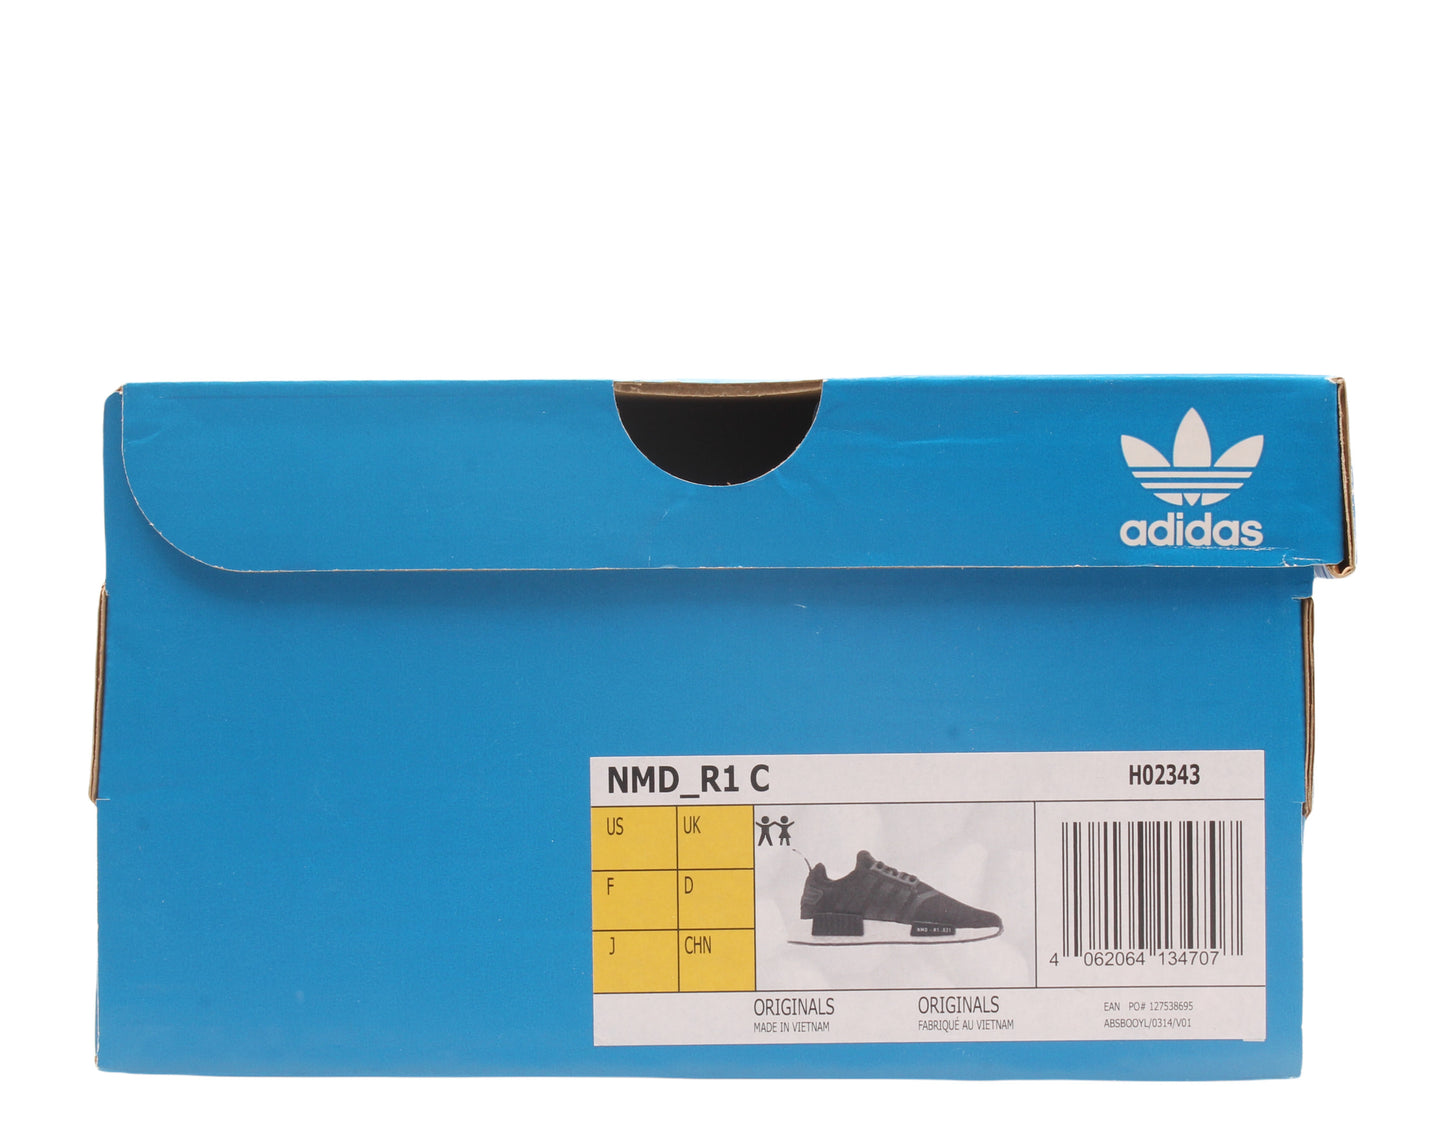 Adidas NMD_R1 C Little Kids Running Shoes